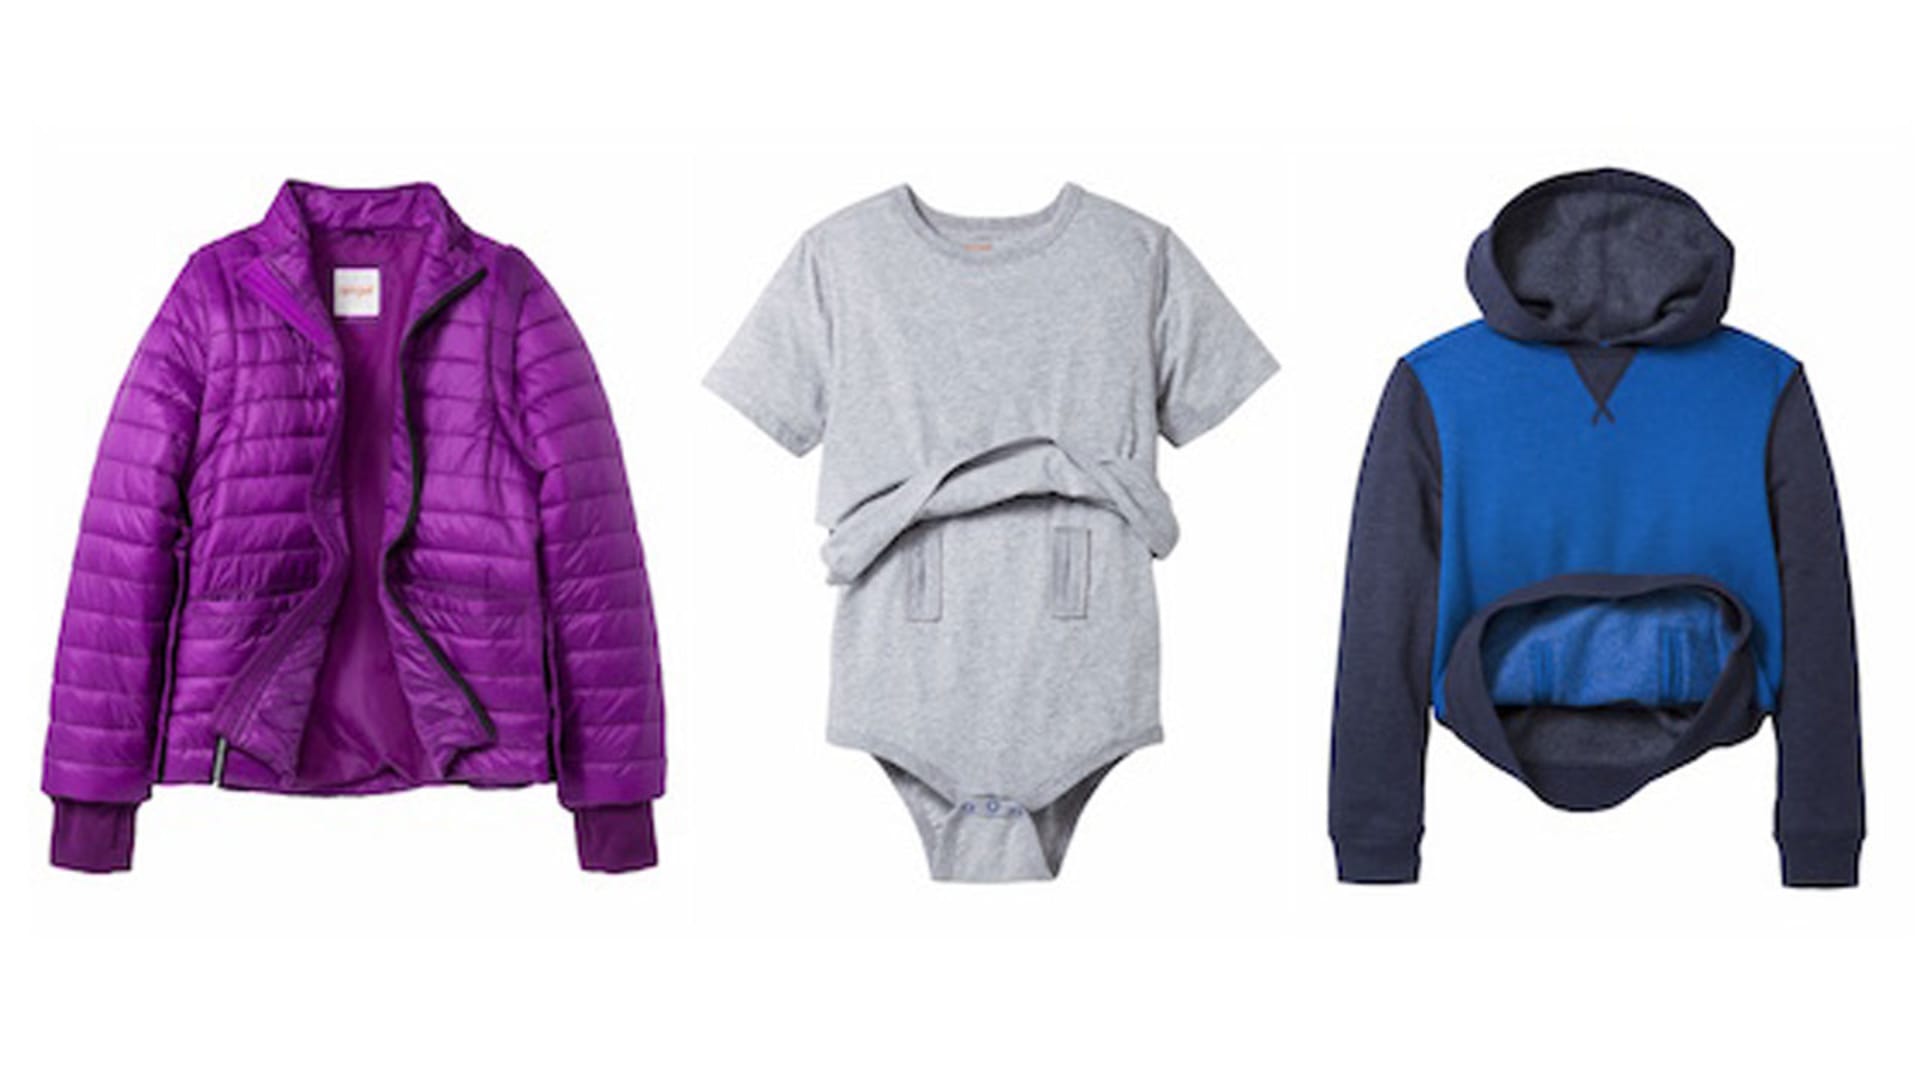 Target announces adaptive apparel for kids living with disabilities